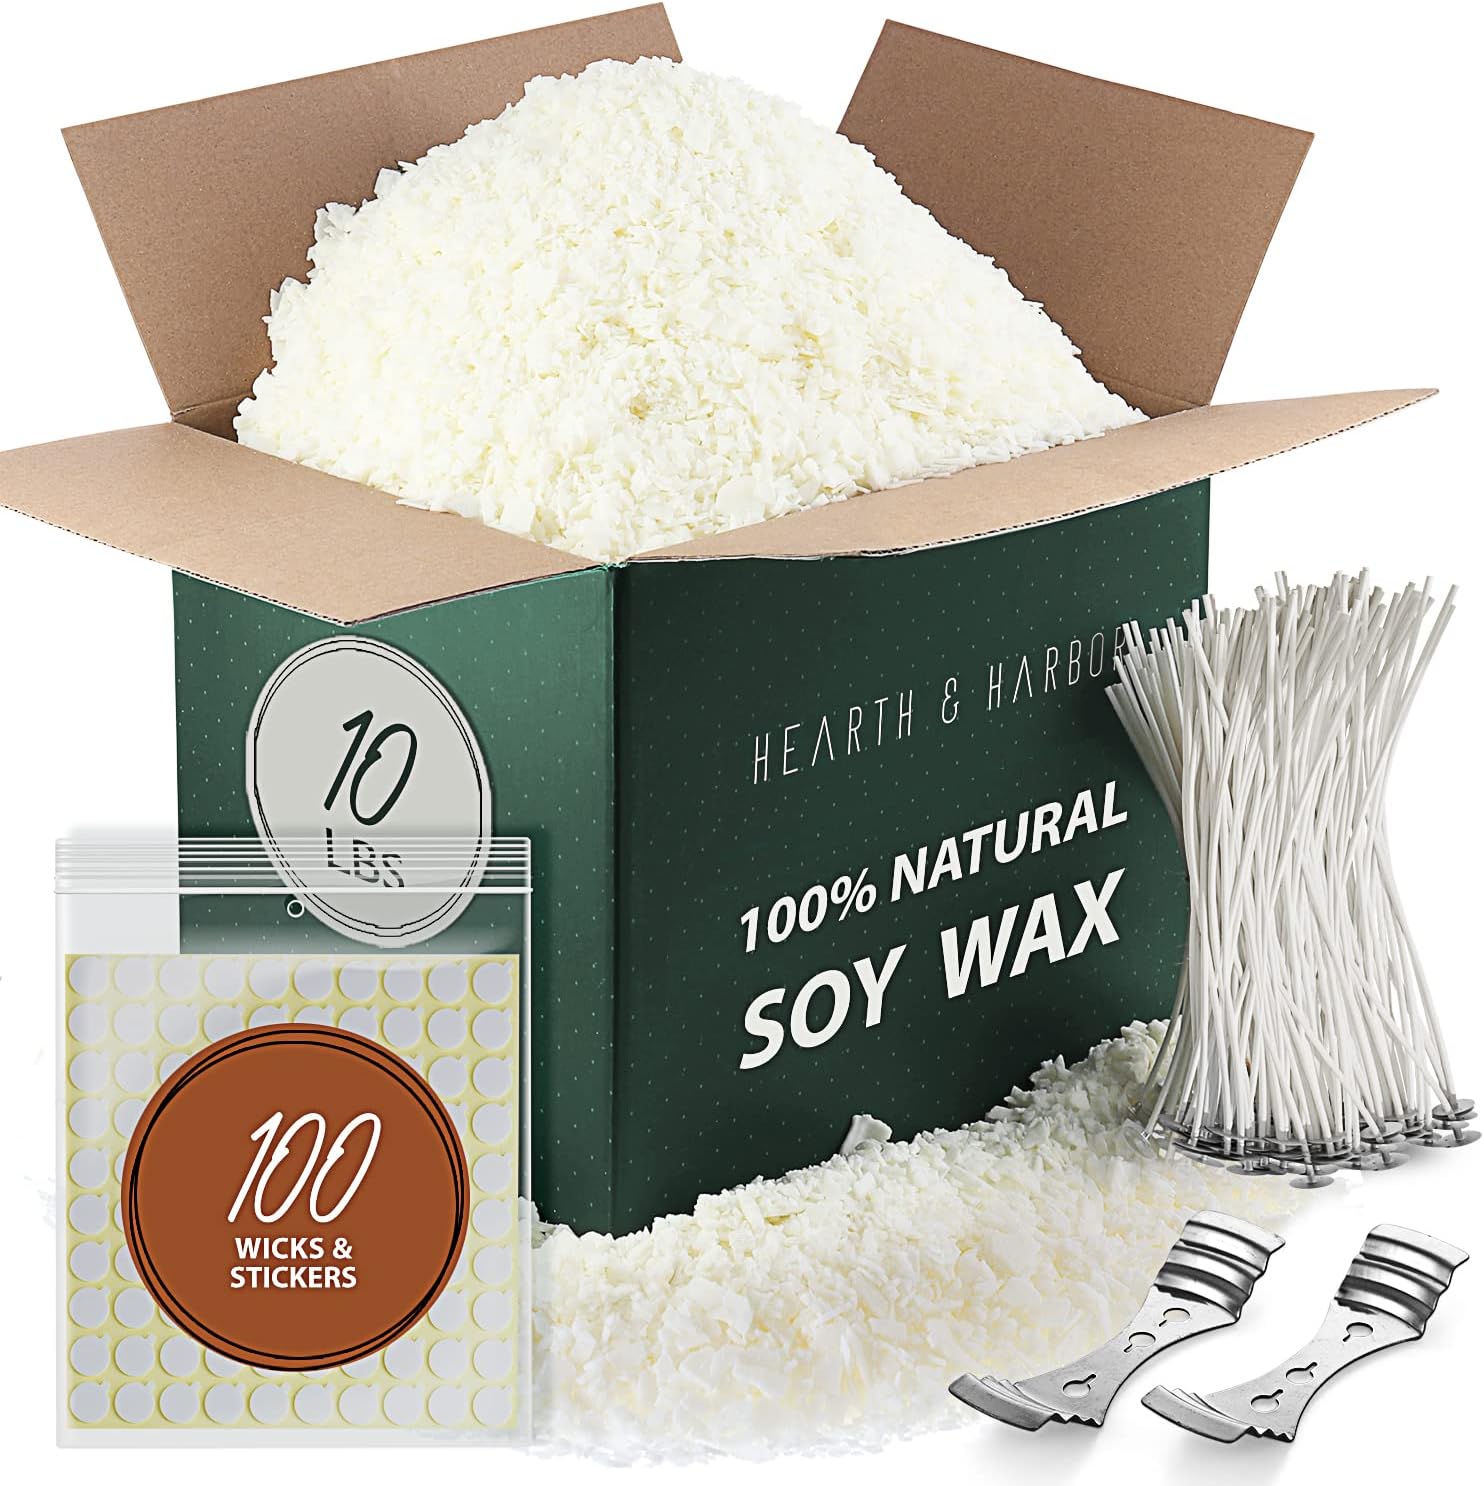 Soy Candle Wax for Candle Making - 10 Lbs